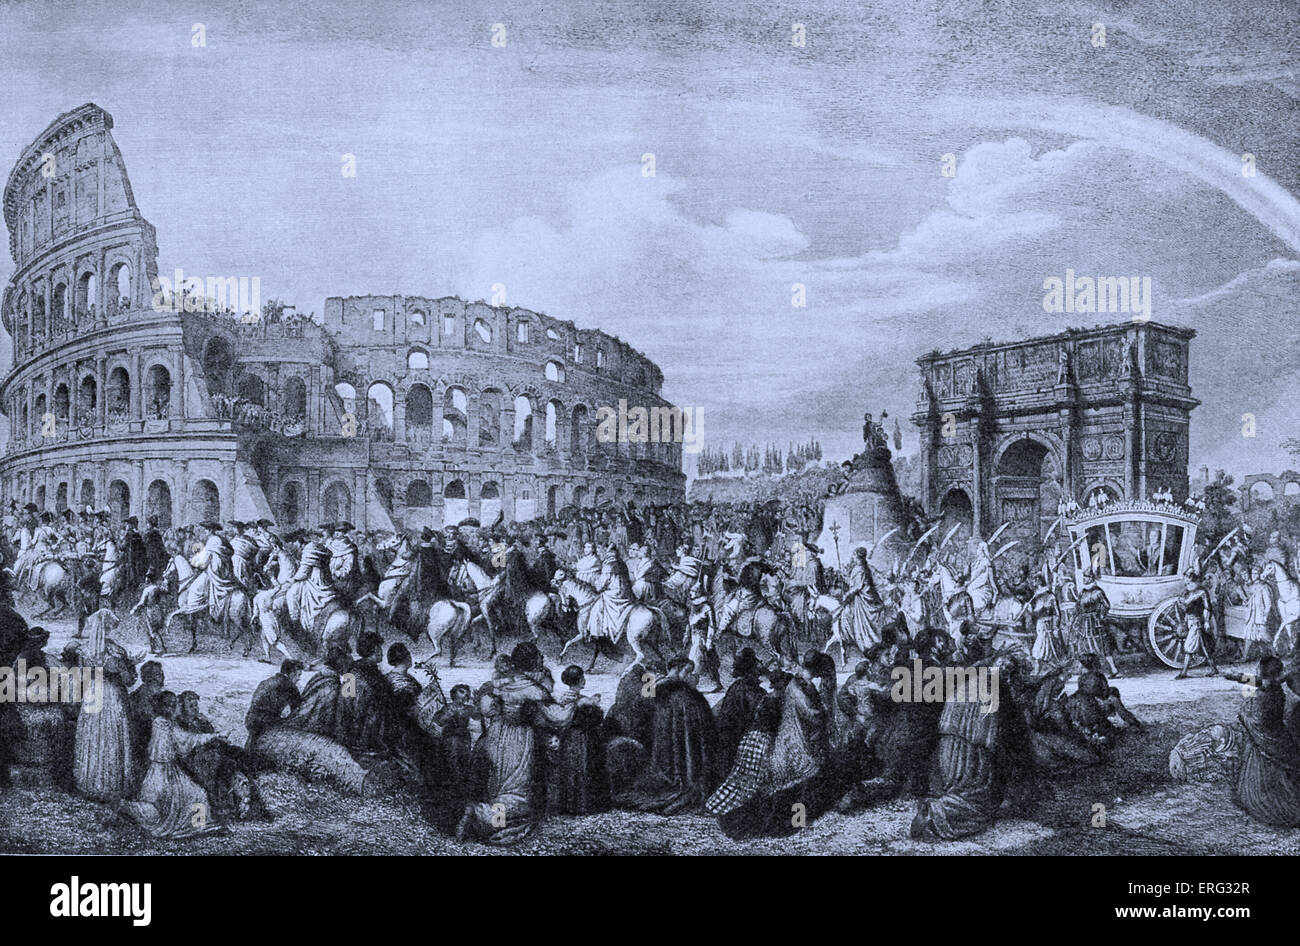 Pope Pius IX at the Colosseum, blessing the population of Rome, Italy.  Pope Pius IX 13 May 1793 - 7 February 1878. Stock Photo